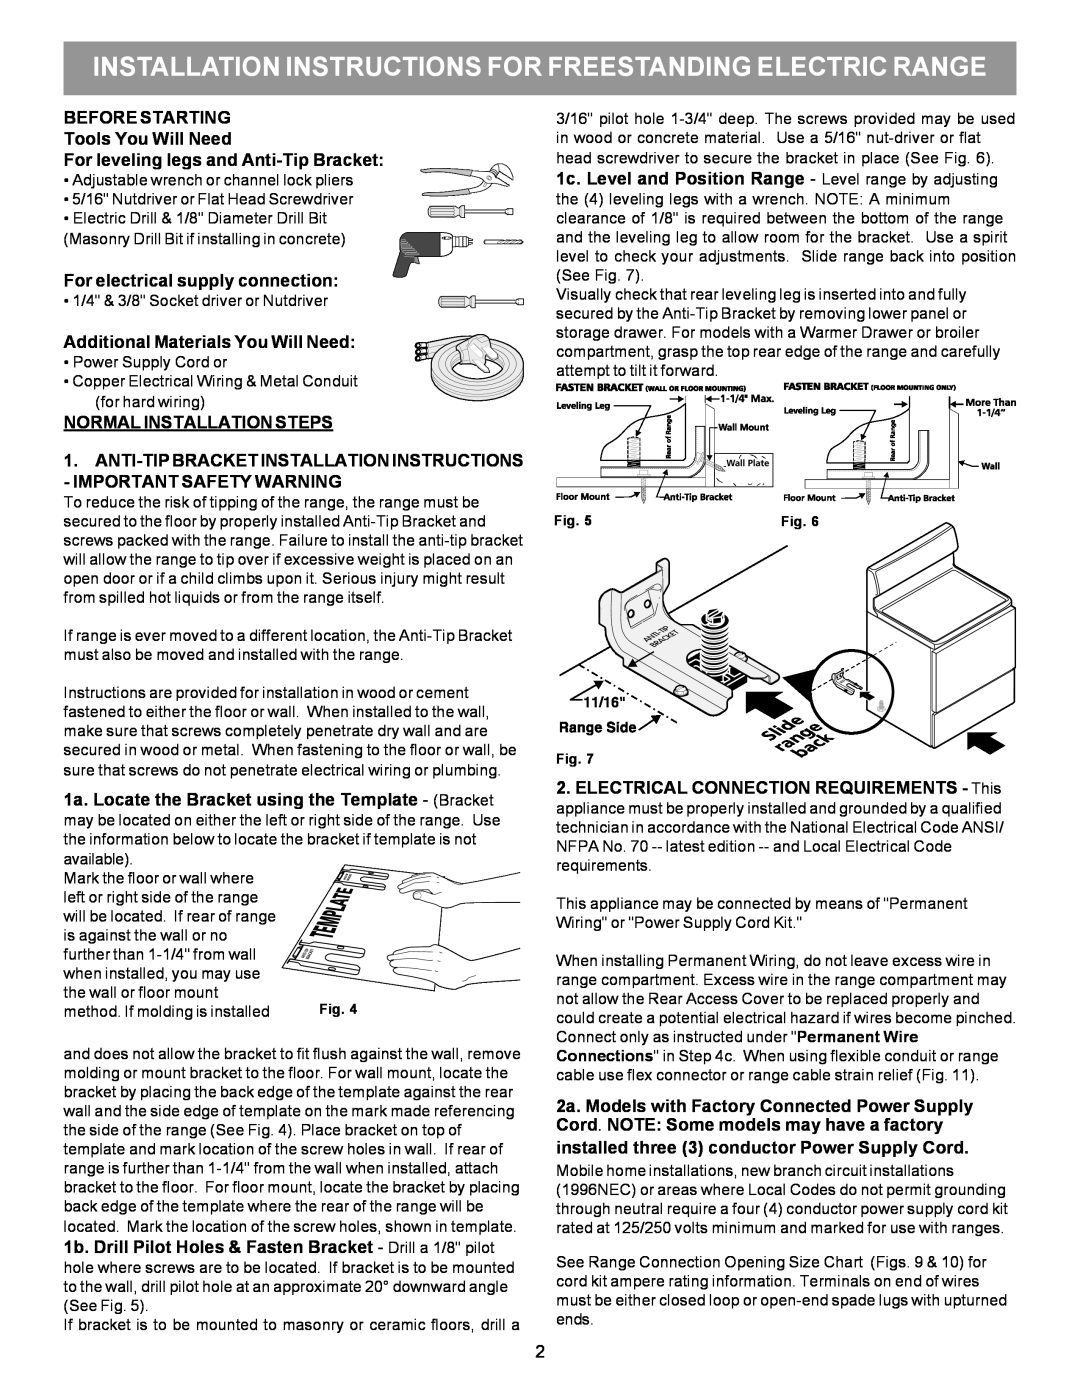 Frigidaire 316454912 manual BEFORE STARTING Tools You Will Need, For leveling legs and Anti-Tip Bracket 